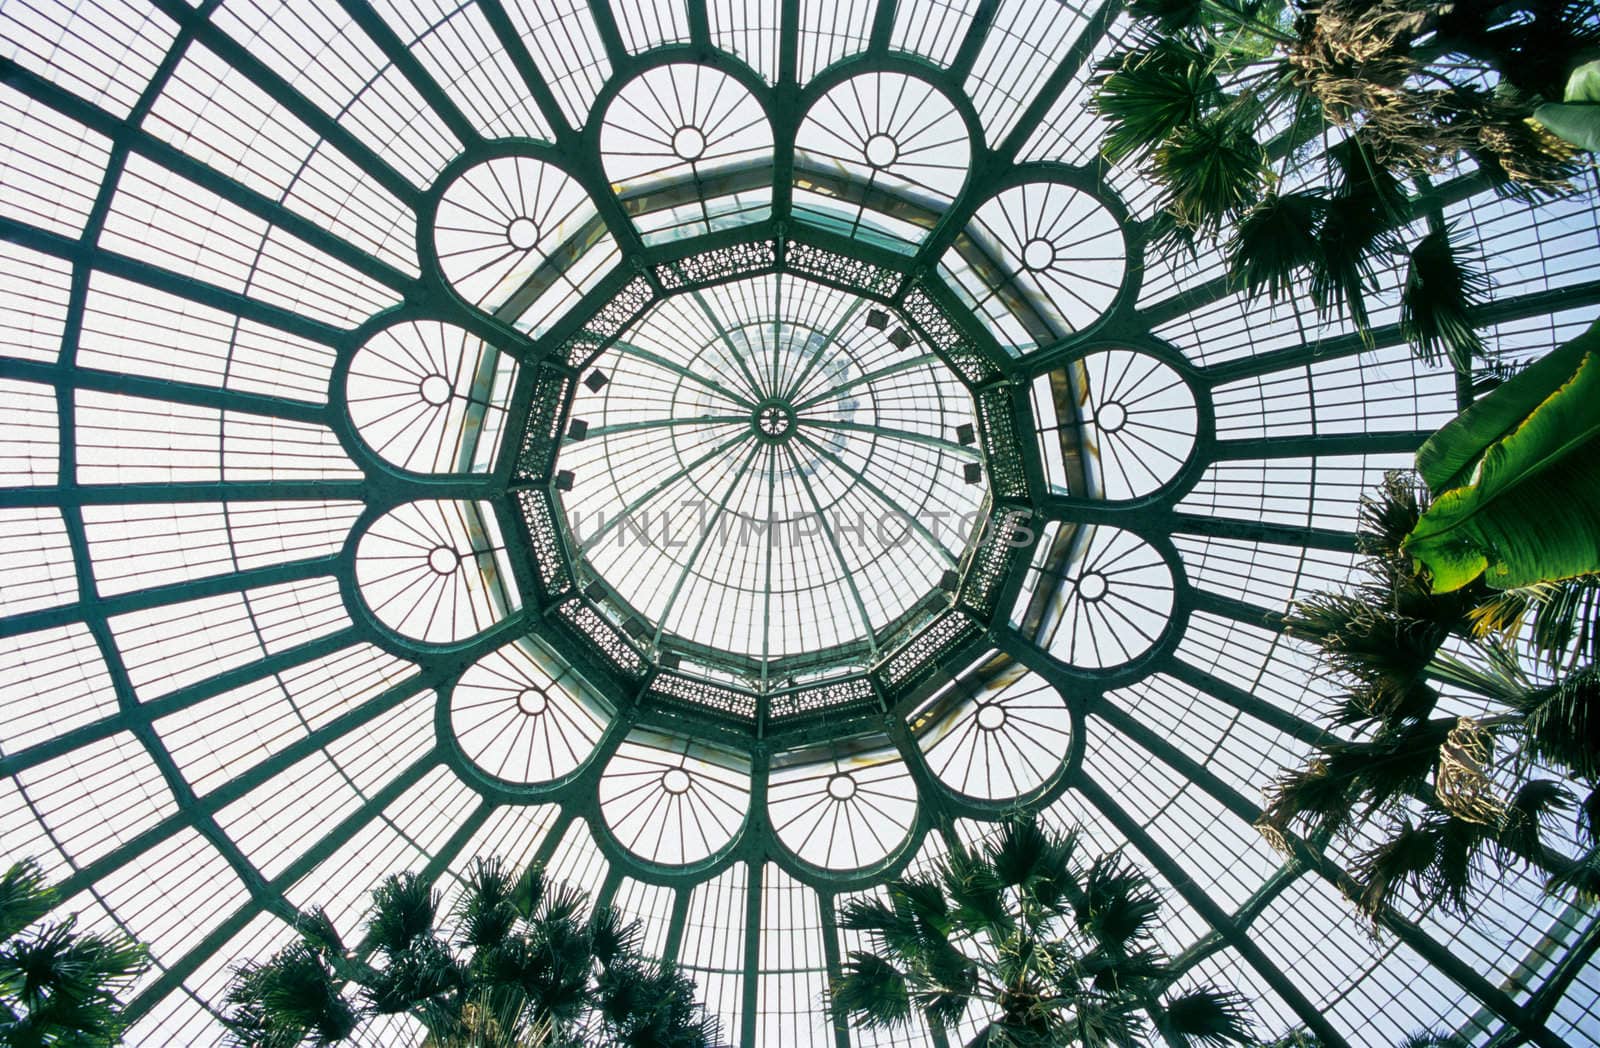 The huge glass and metal dome of the Royal Greenhouse in Laeken, Belgium is a popular tourist sight in the Brussels region. 